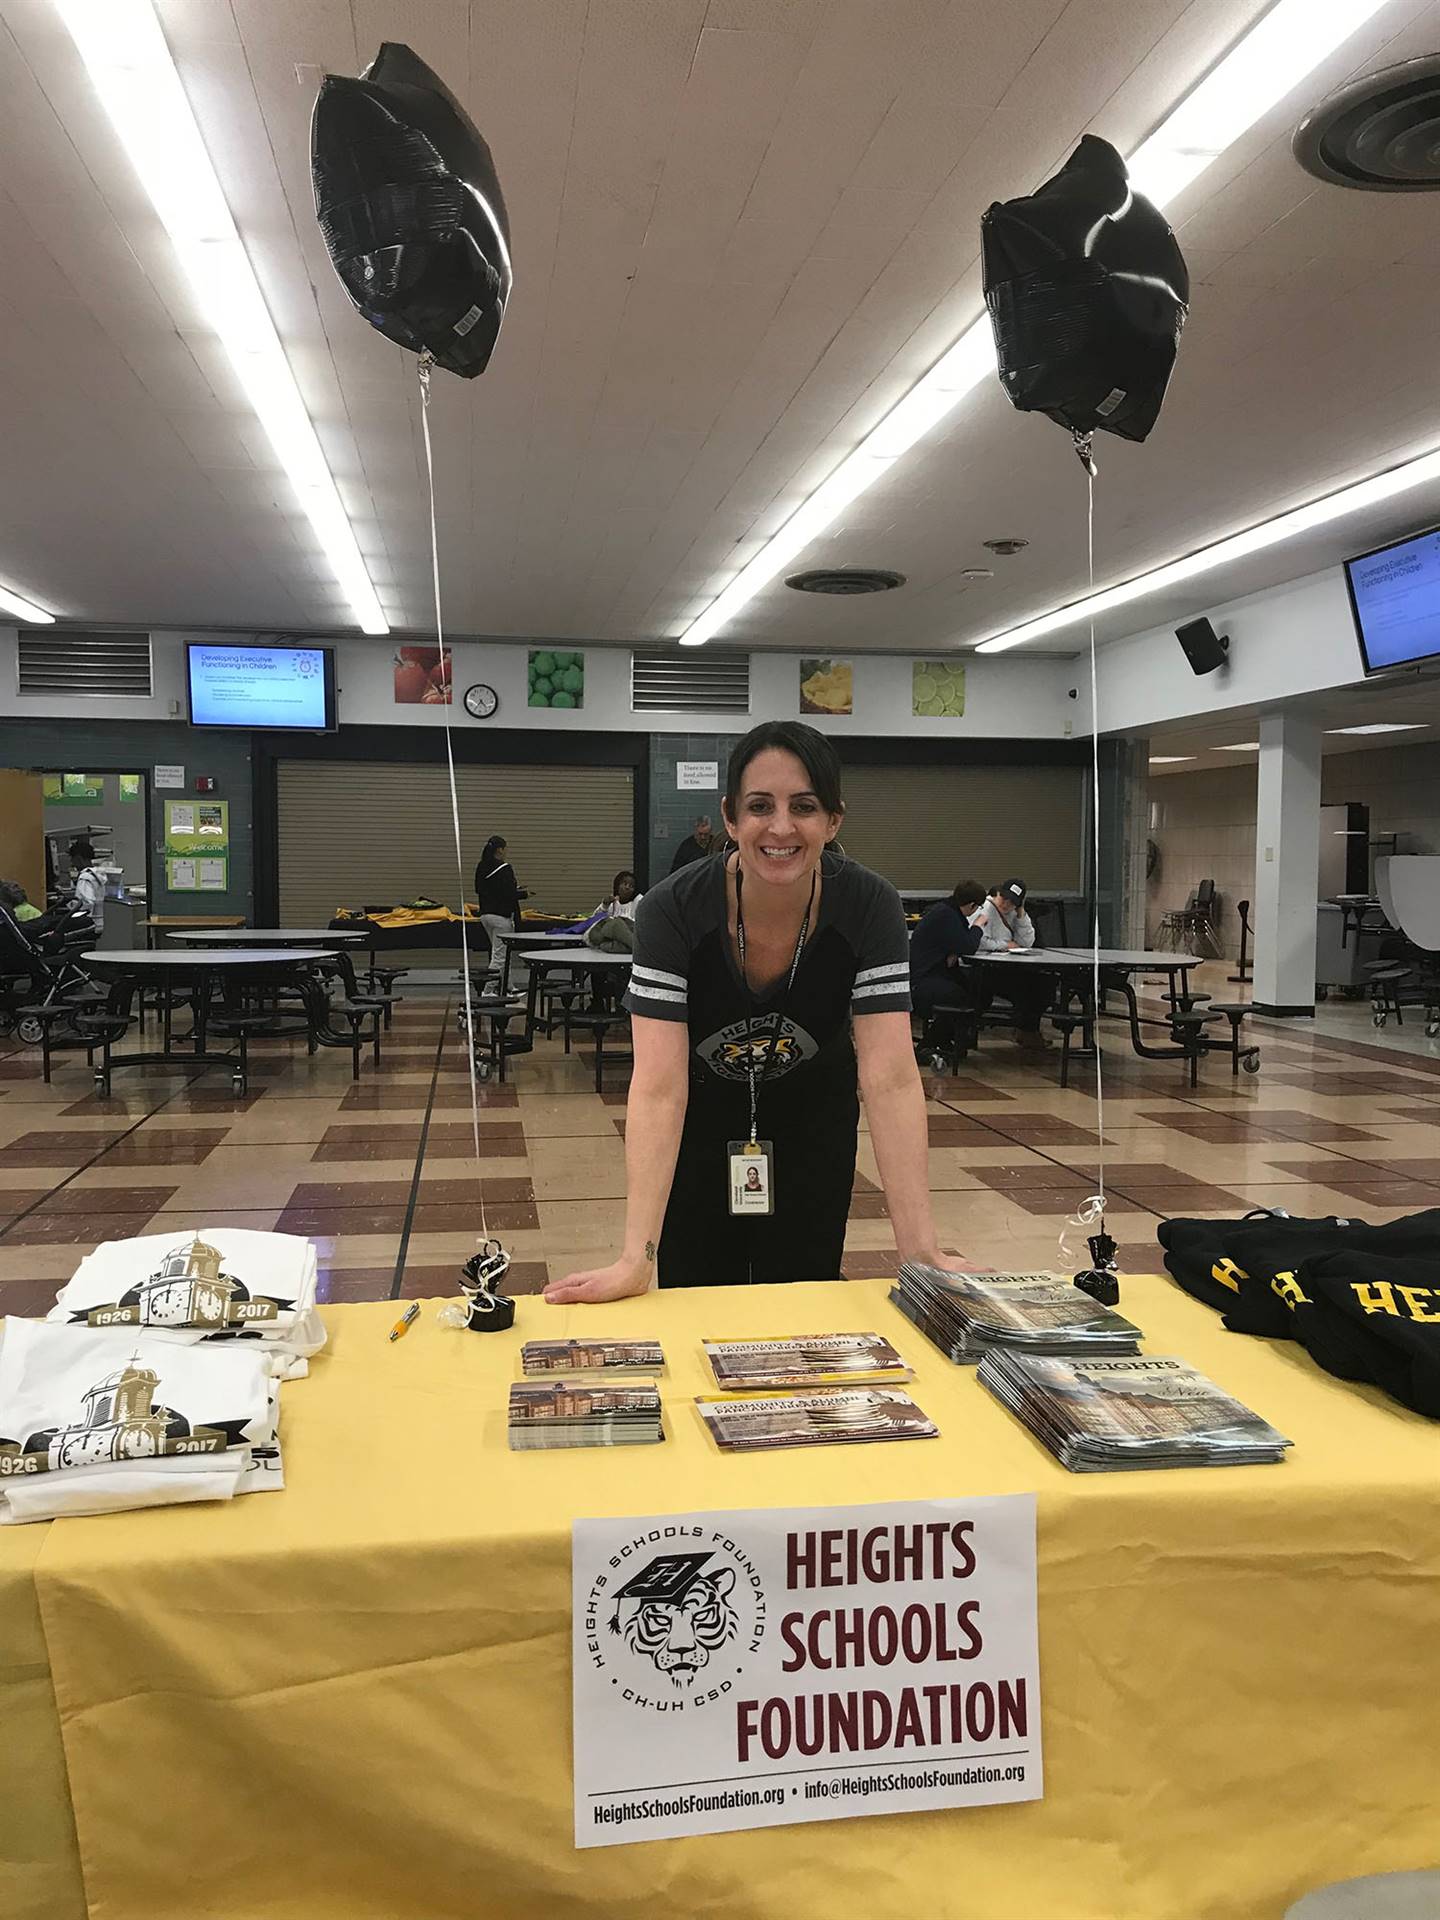 Heights Schools Foundation table